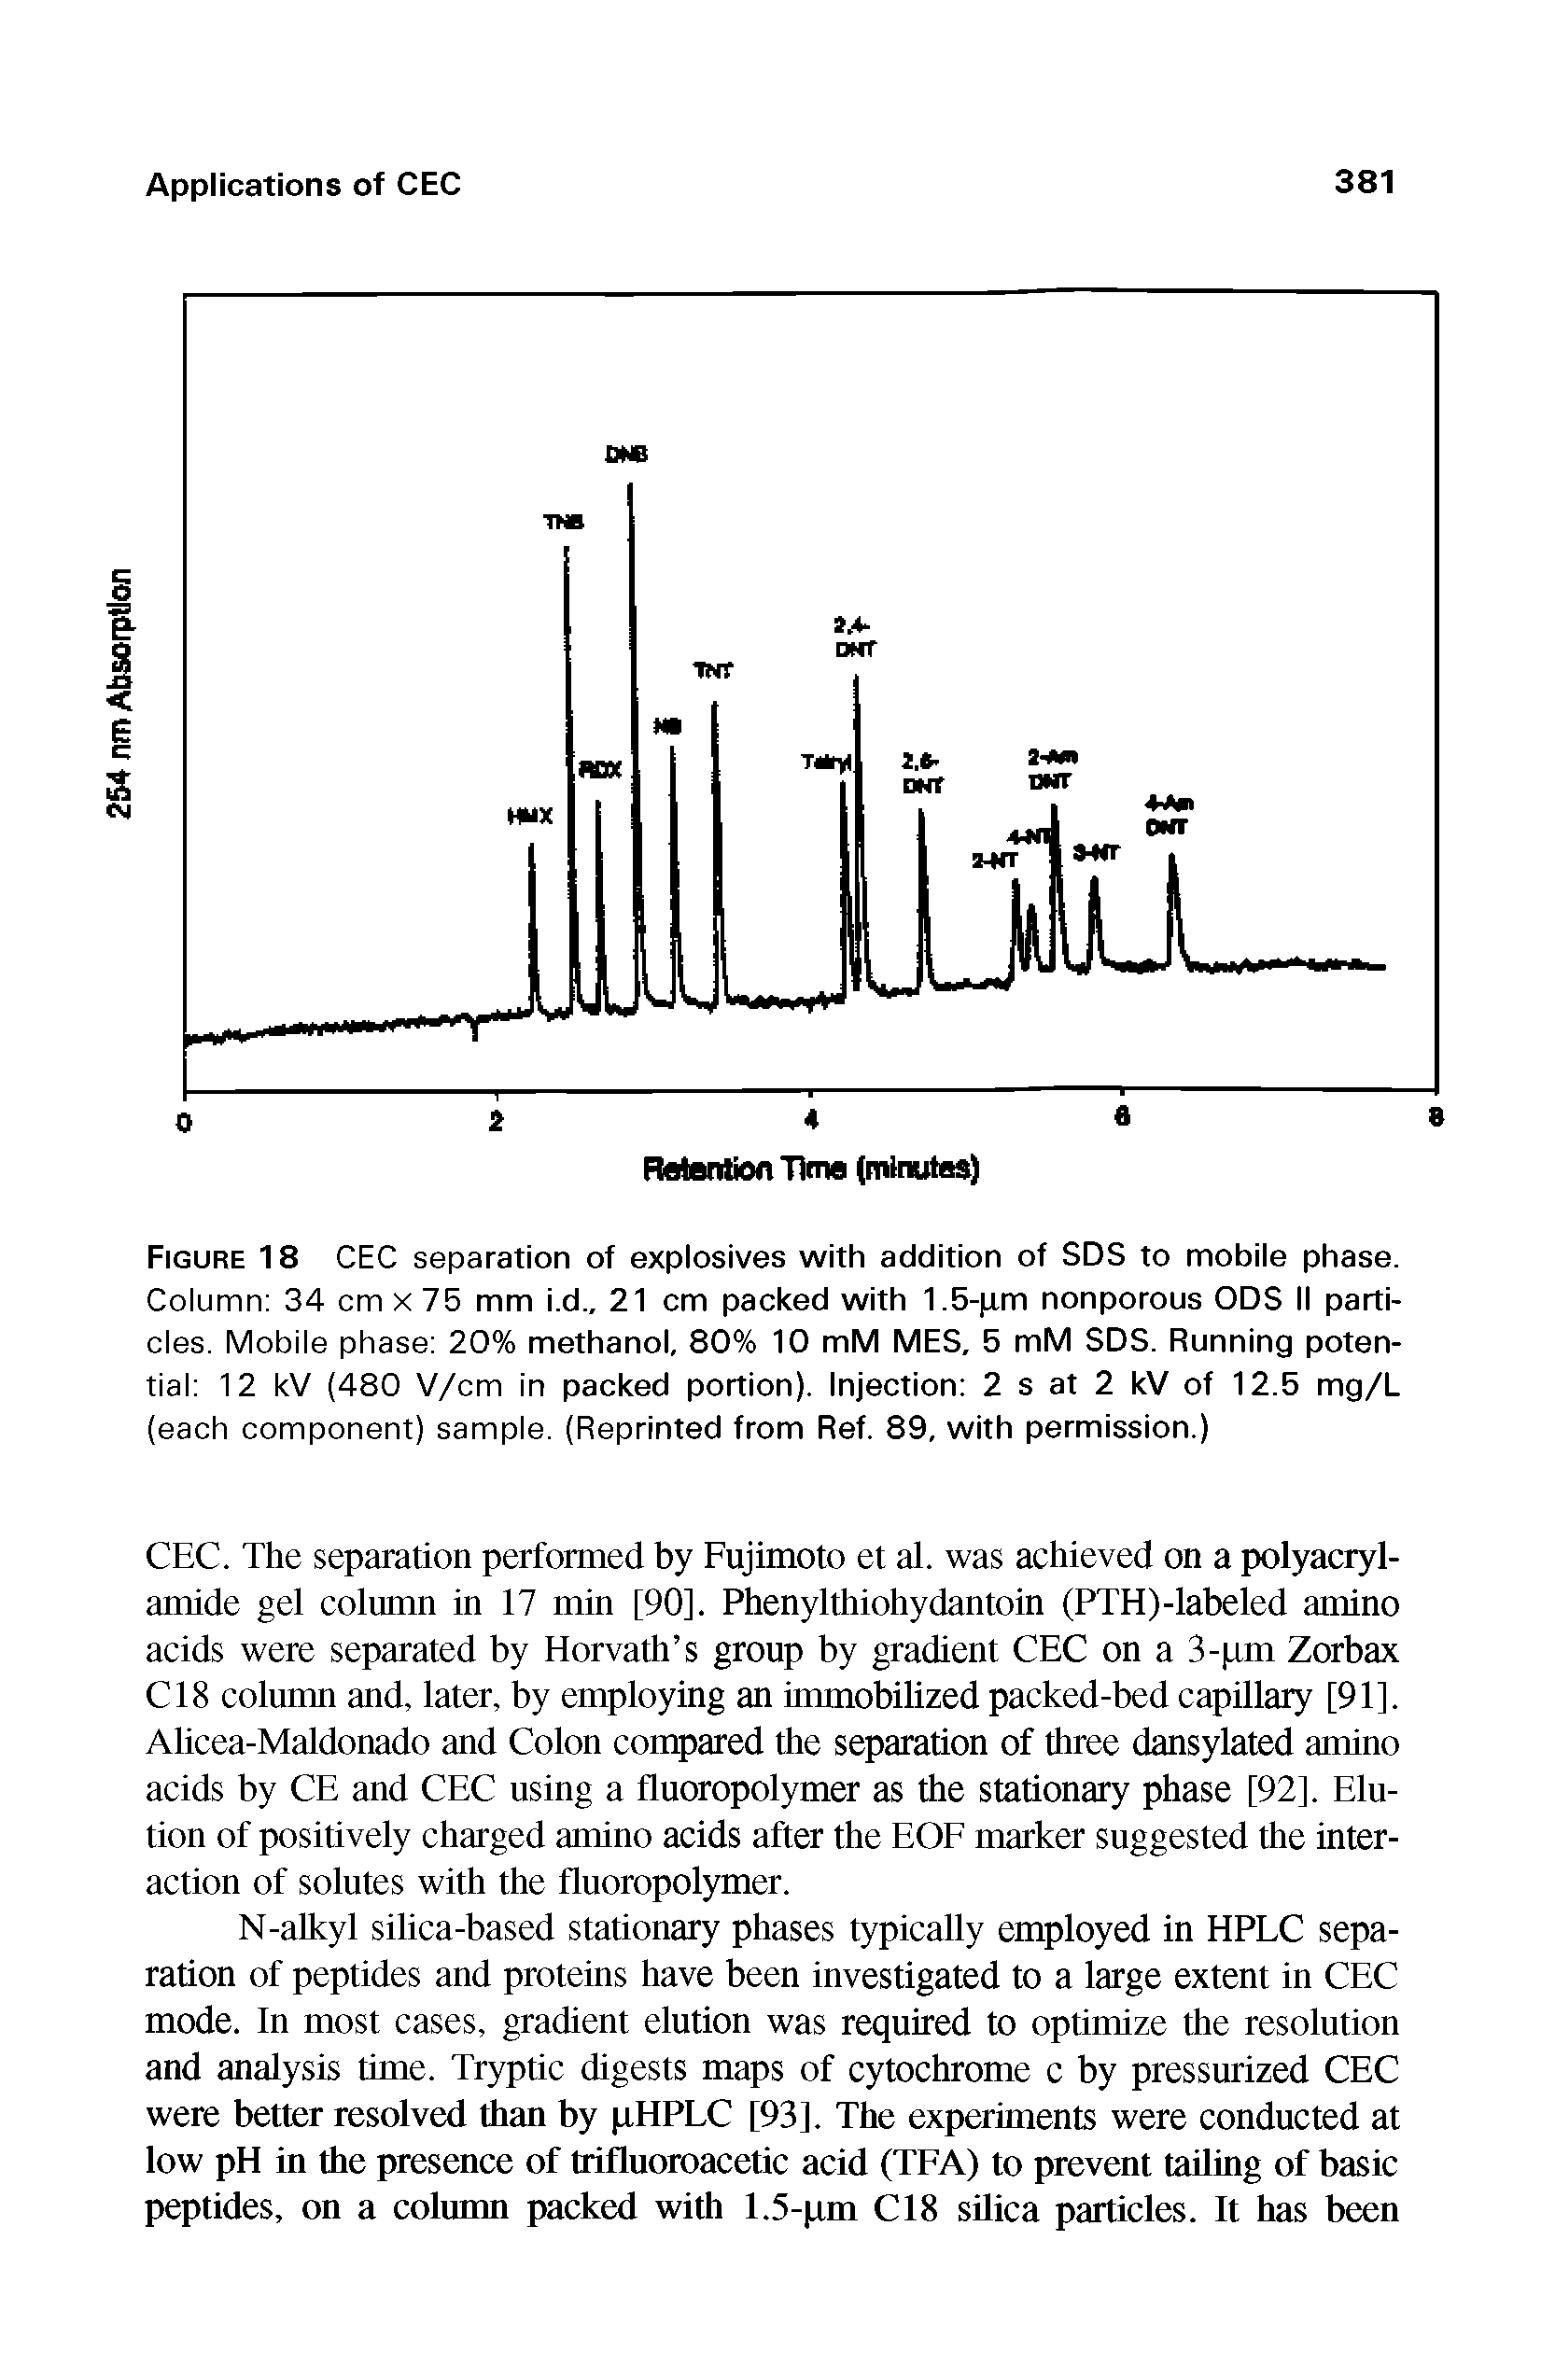 Figure 18 CEC separation of explosives with addition of SDS to mobile phase. Column 34 cm x 75 mm i.d., 21 cm packed with 1.5-pm nonporous ODS II particles. Mobile phase 20% methanol, 80% 10 mM MES, 5 mM SDS. Running potential 12 kV (480 V/cm in packed portion). Injection 2 s at 2 kV of 12.5 mg/L (each component) sample. (Reprinted from Ref. 89, with permission.)...